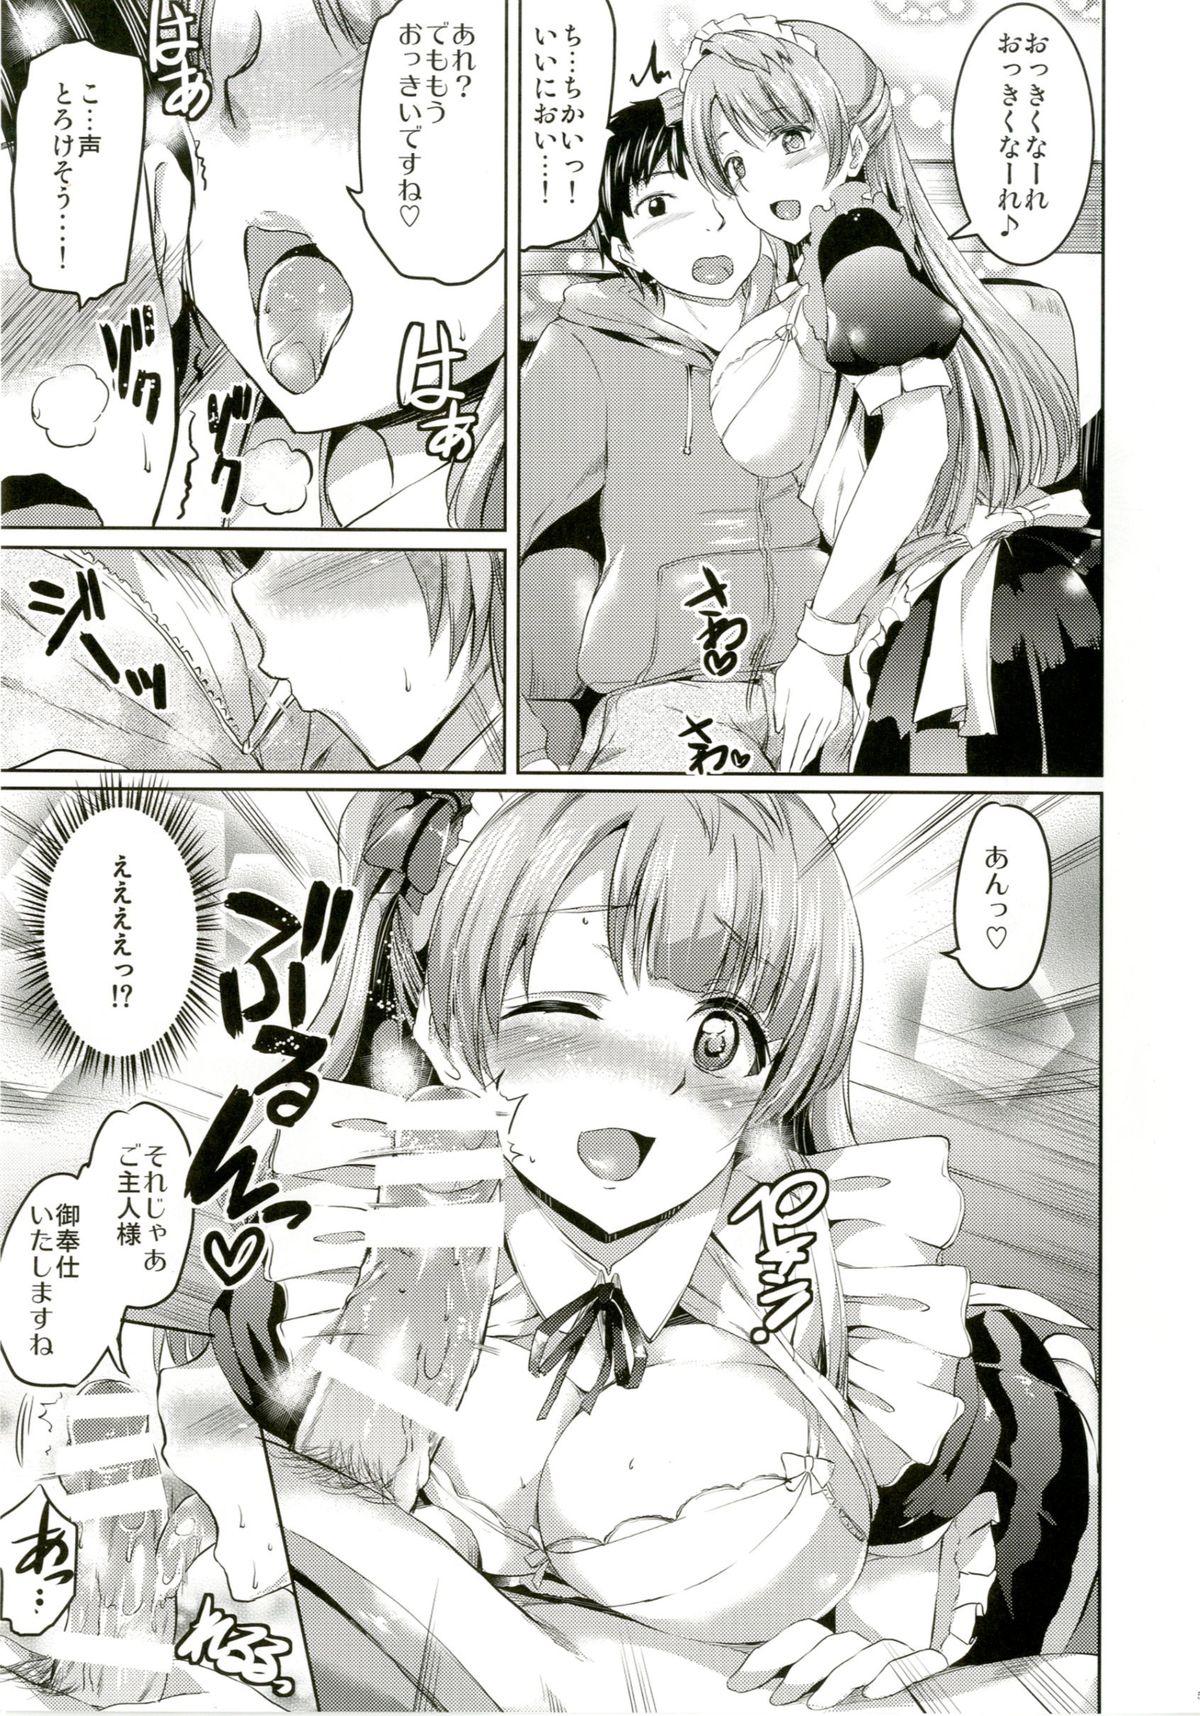 Suckingdick Maid Live! Ver.A-rise - Love live Climax - Page 7